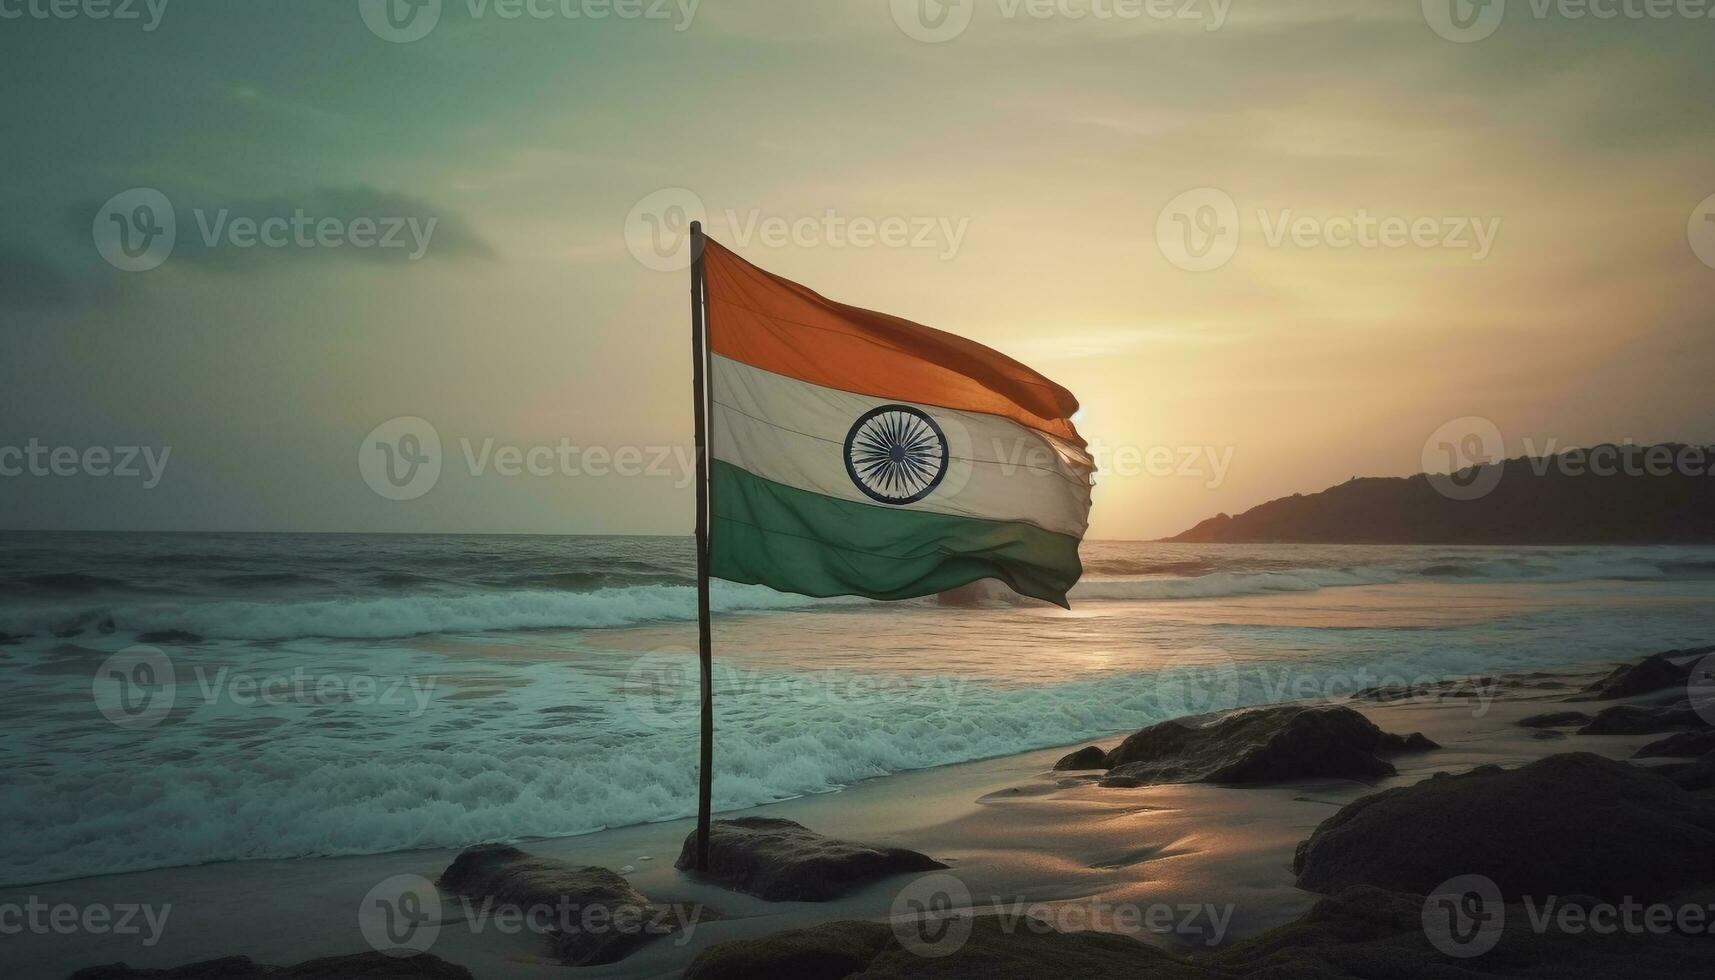 Patriotic symbol waves over tranquil coastline beauty generated by AI photo